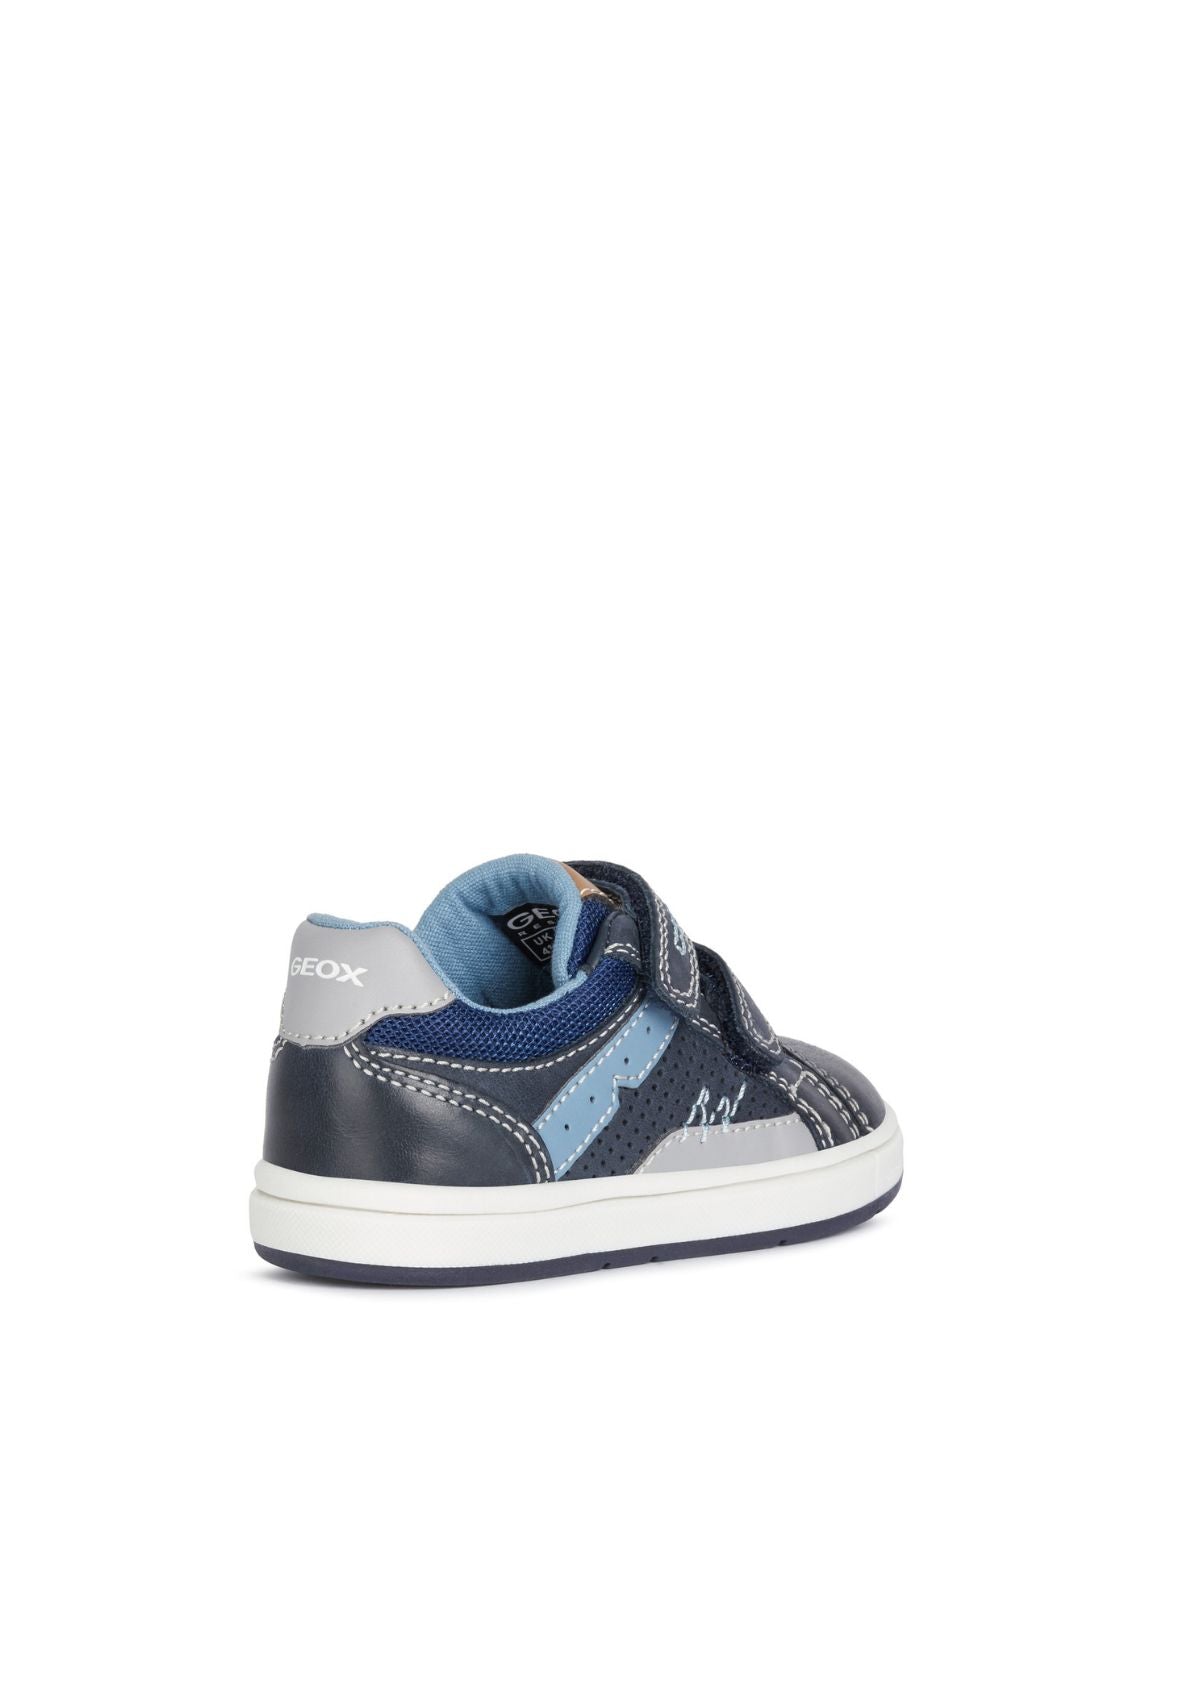 Geox Baby Boys Trainers TROTTOLA Navy White side back